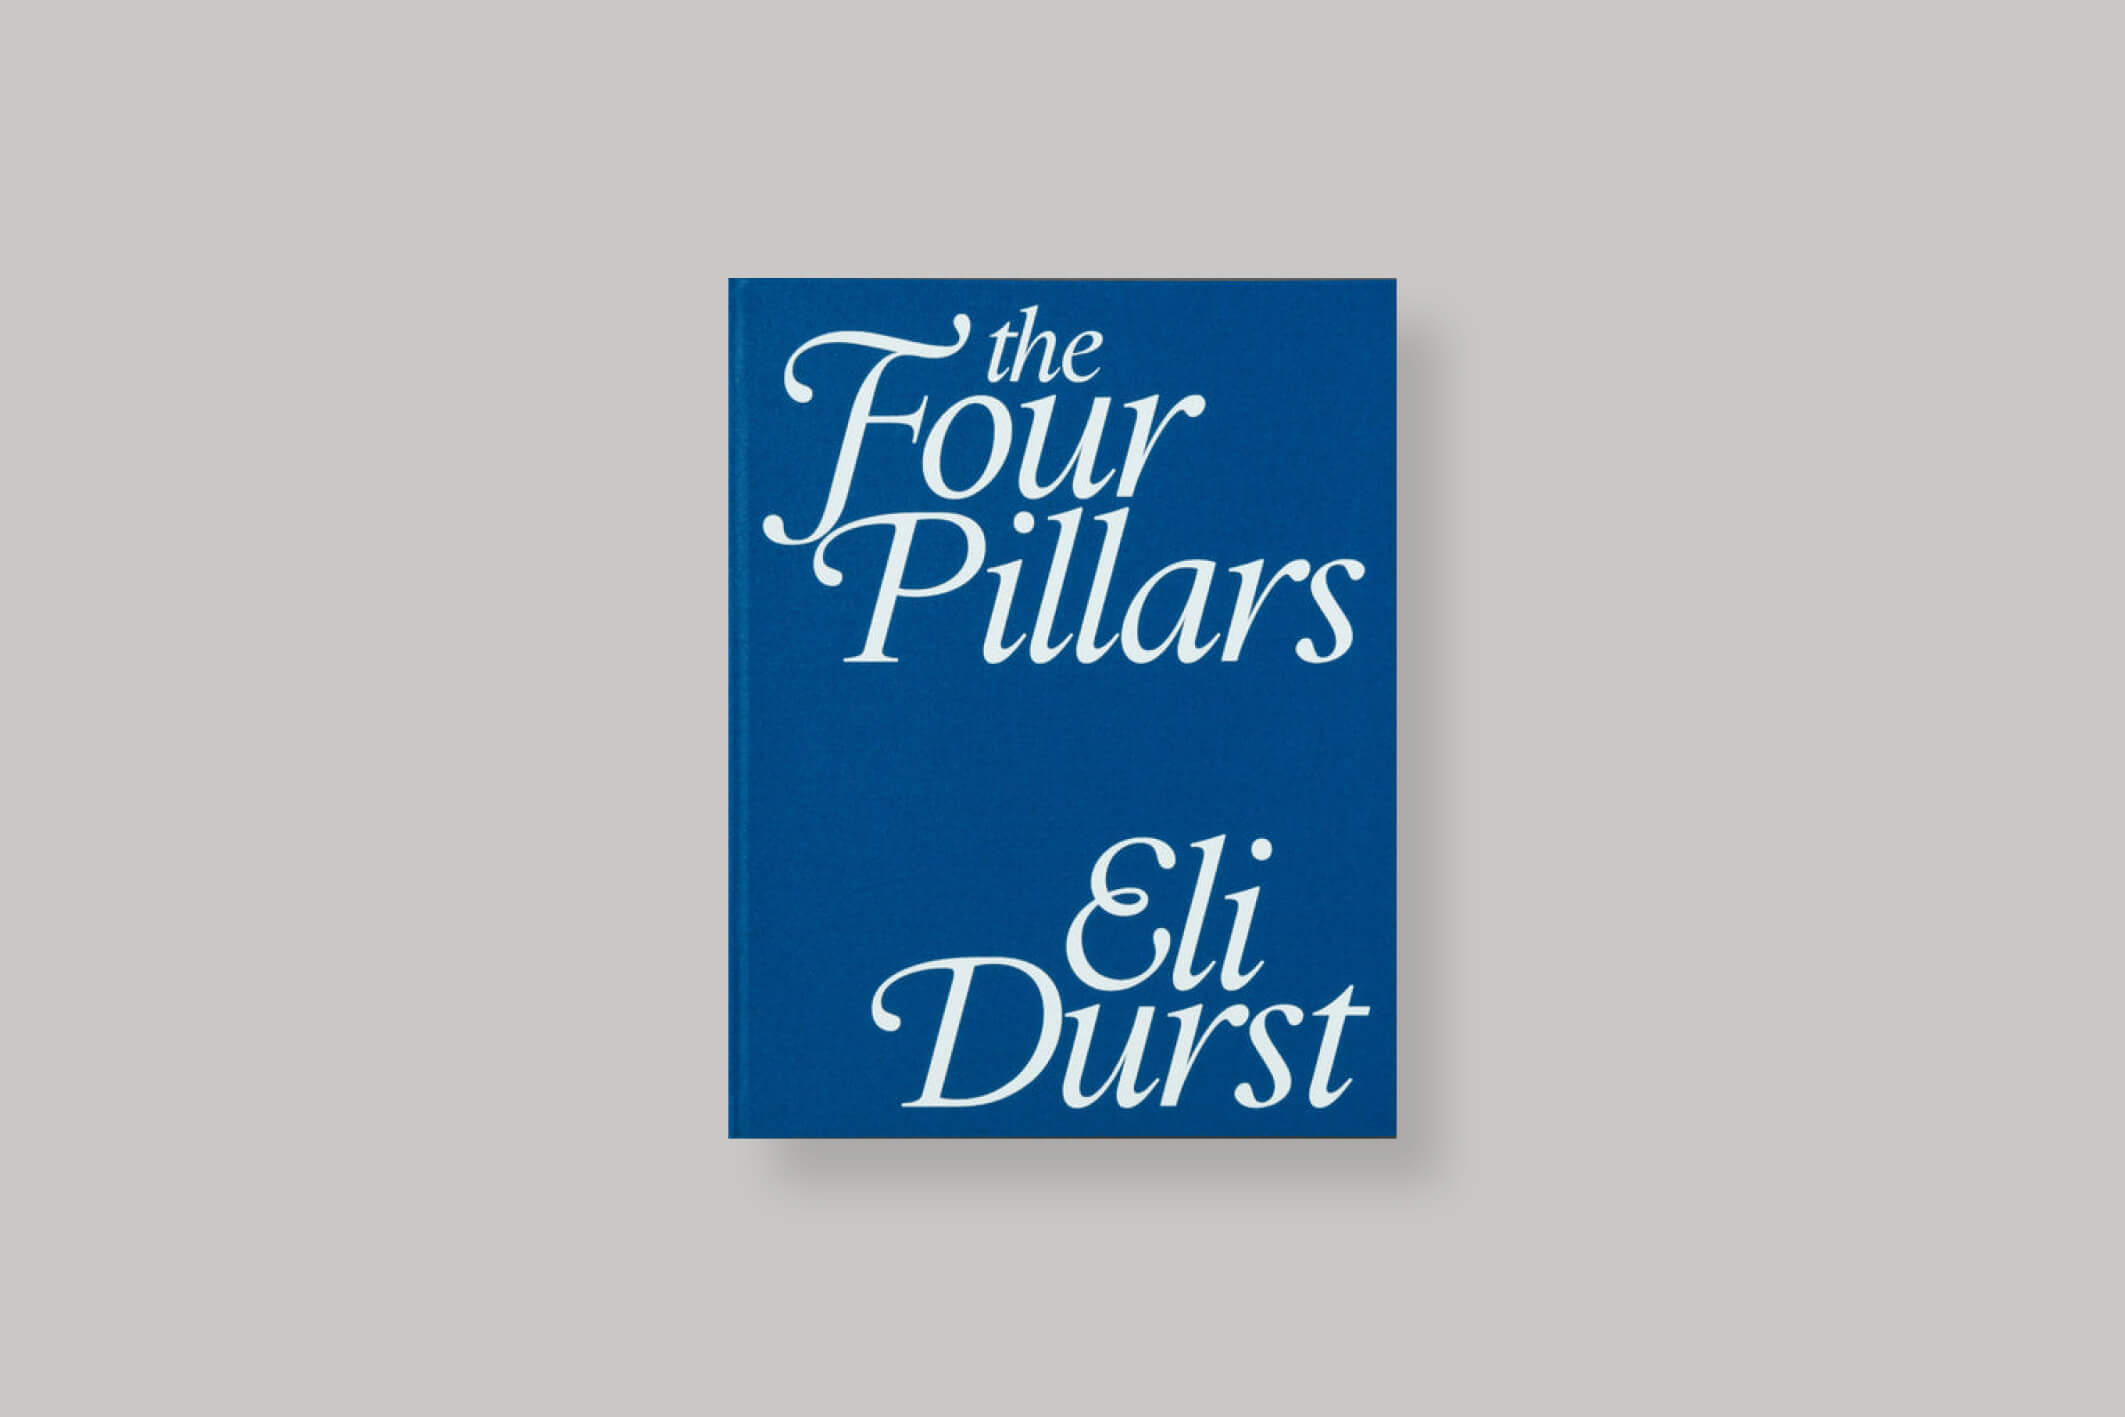 the-four-pillars-durst-loose-joints-publishing-cover